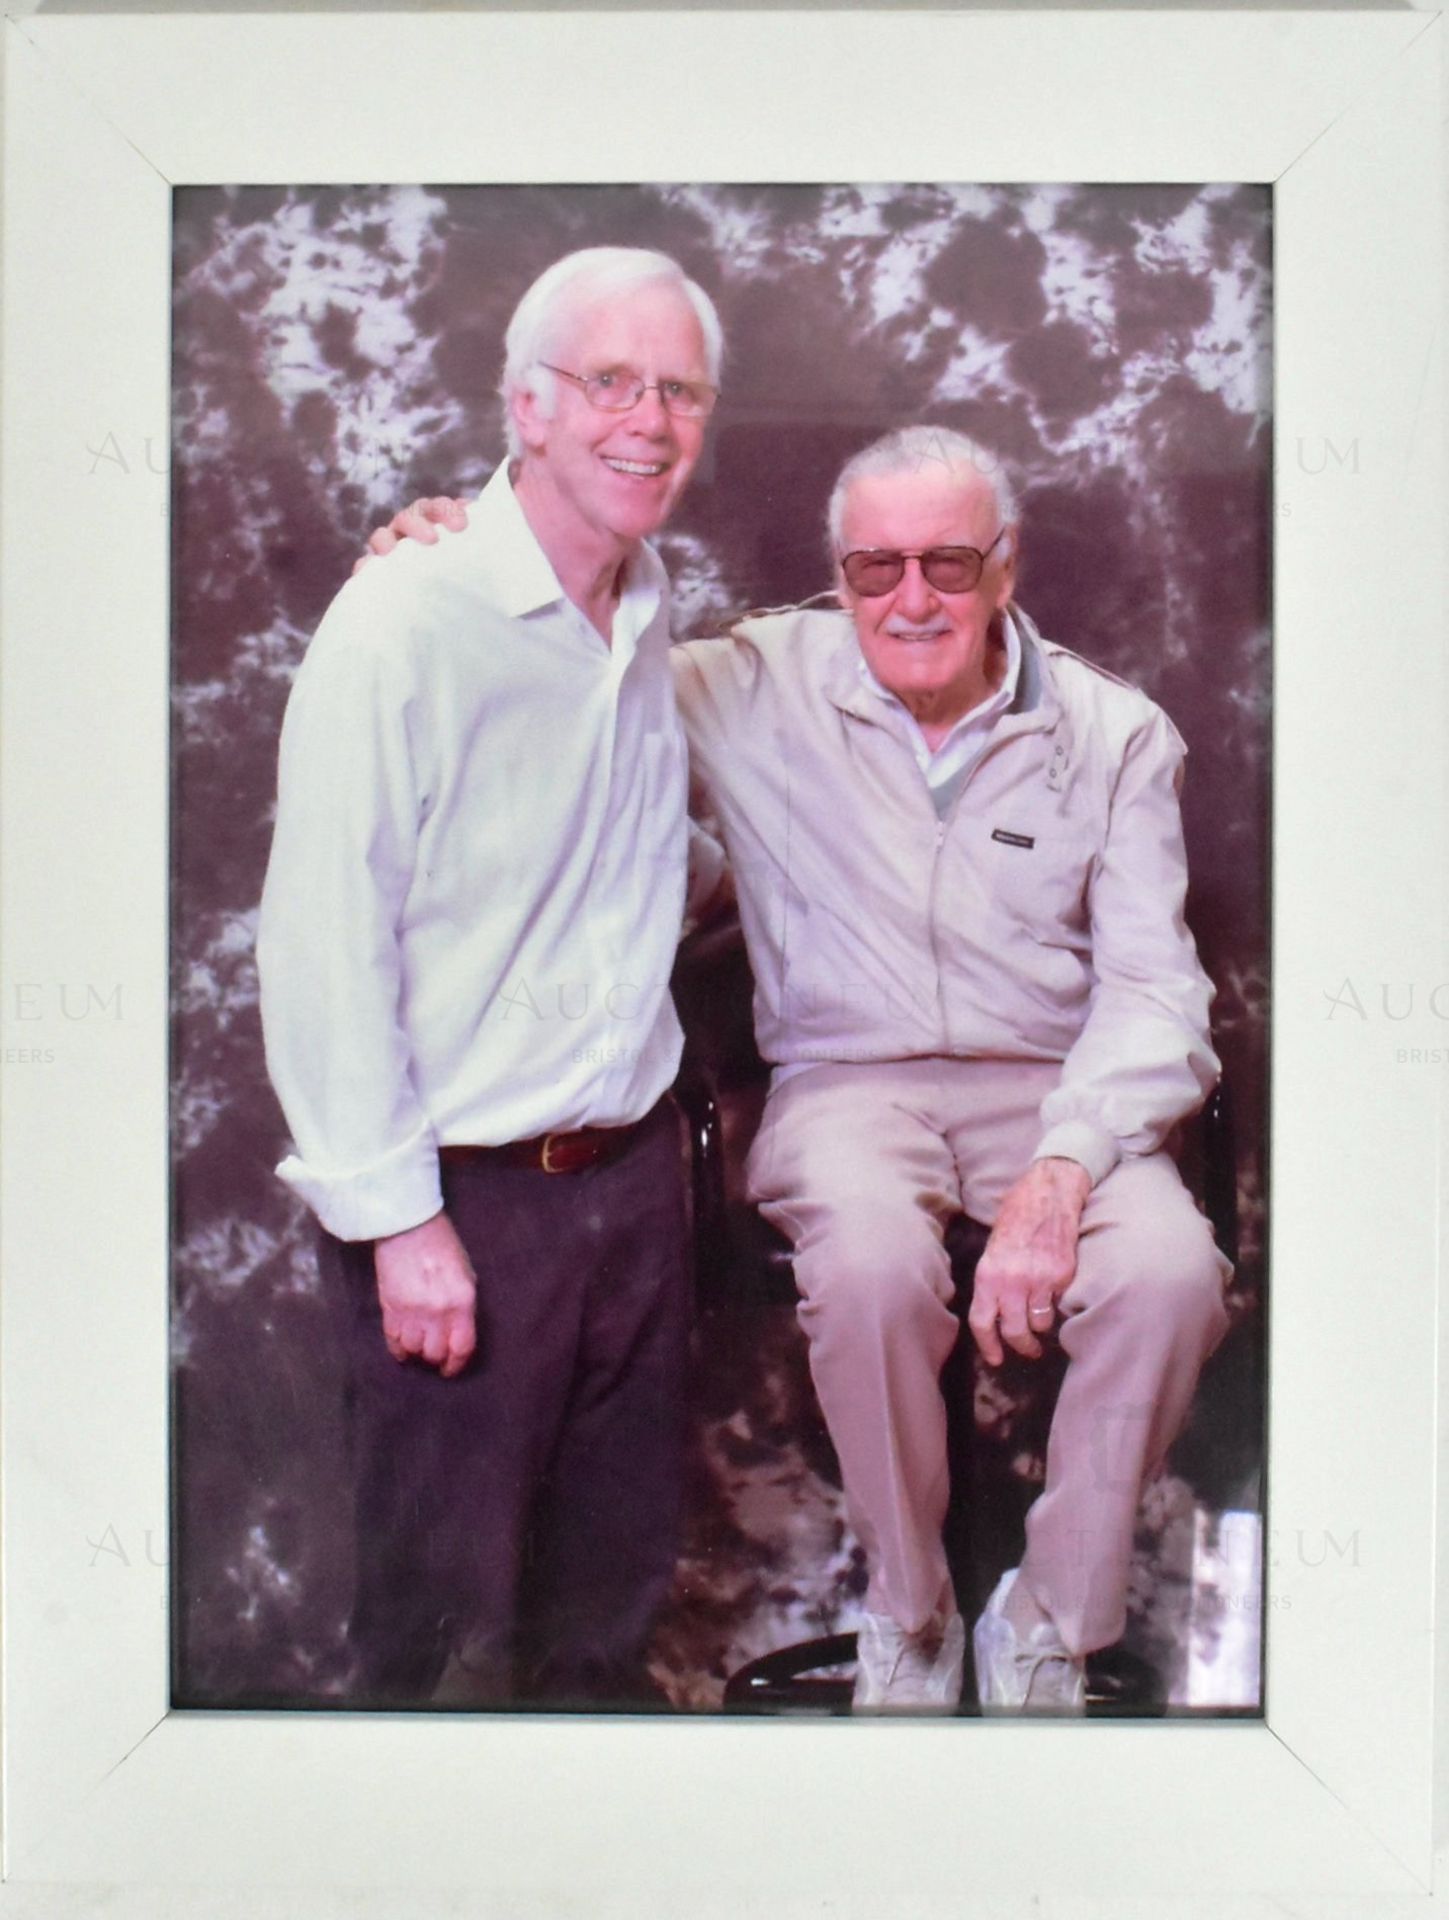 ESTATE OF JEREMY BULLOCH - STAN LEE (MARVEL) - PERSONAL PHOTOGRAPH